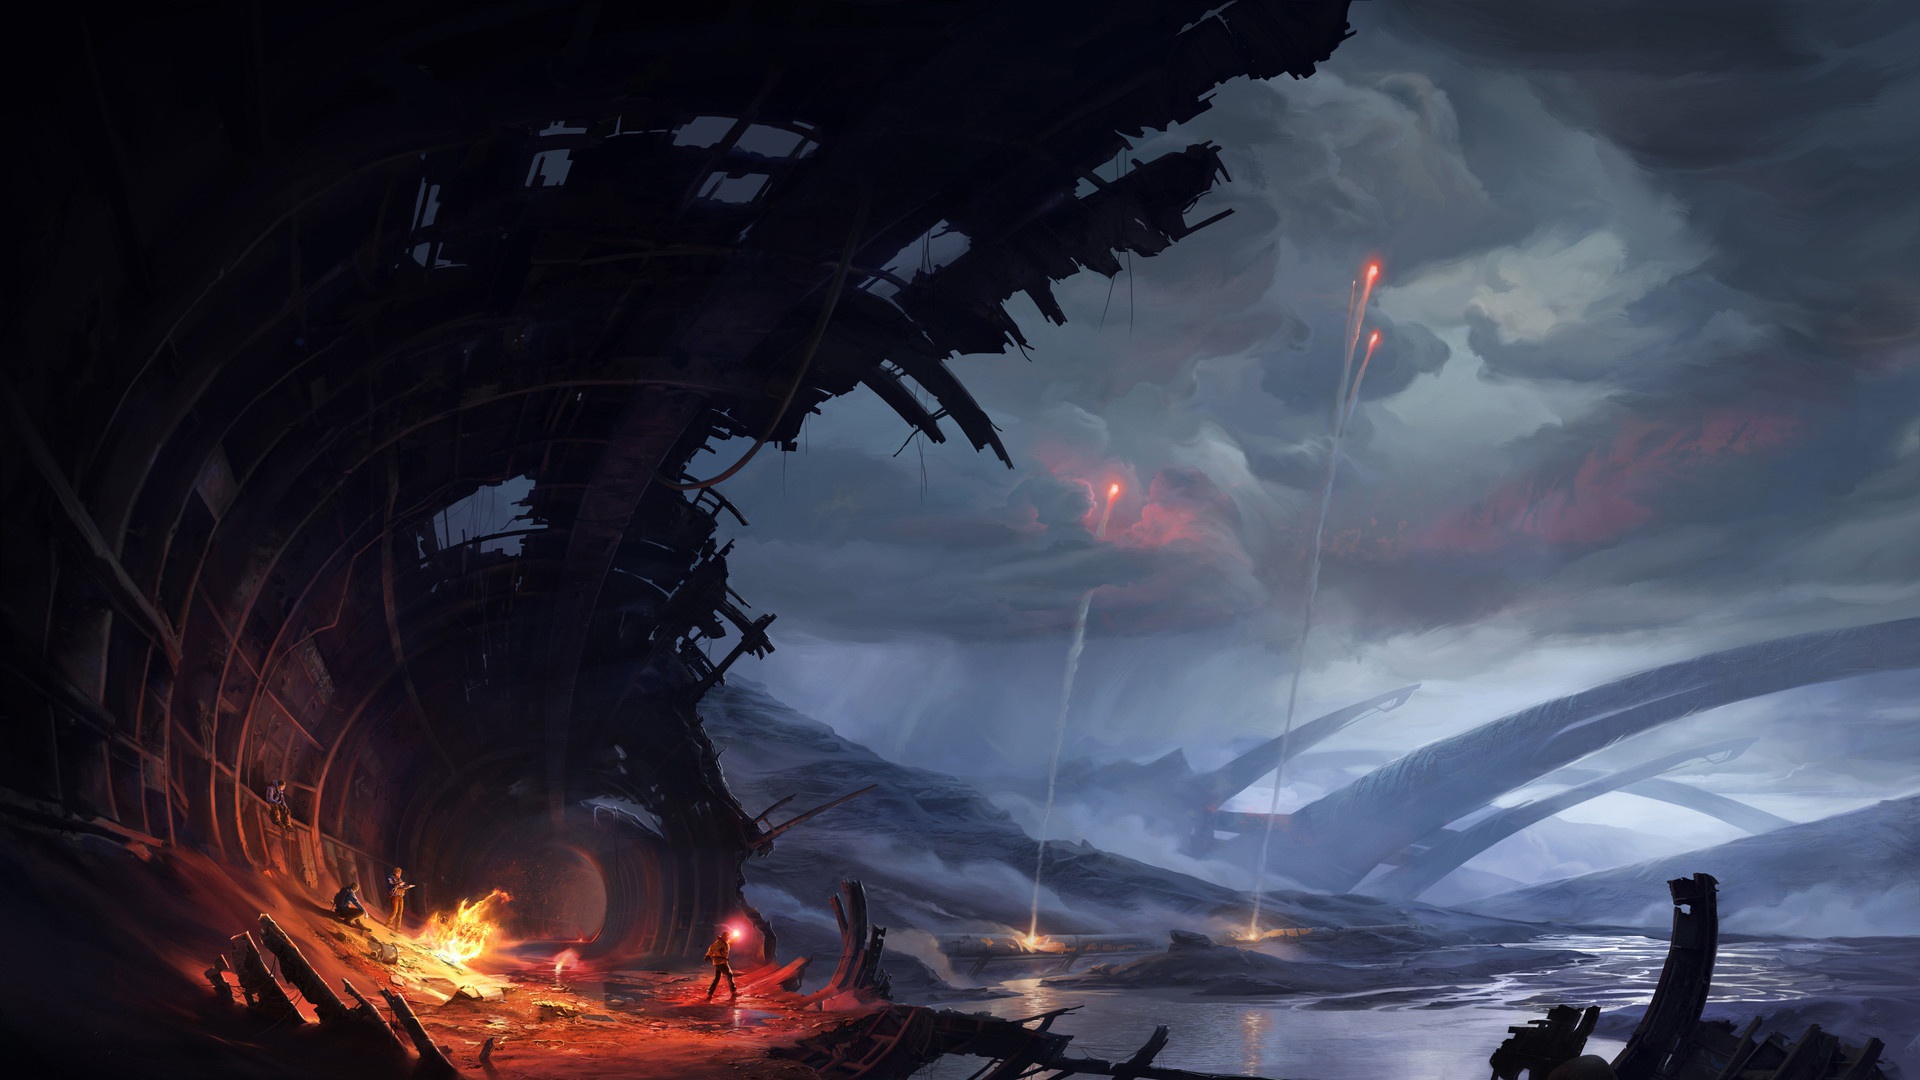 General 1920x1080 sky science fiction artwork apocalyptic campfire